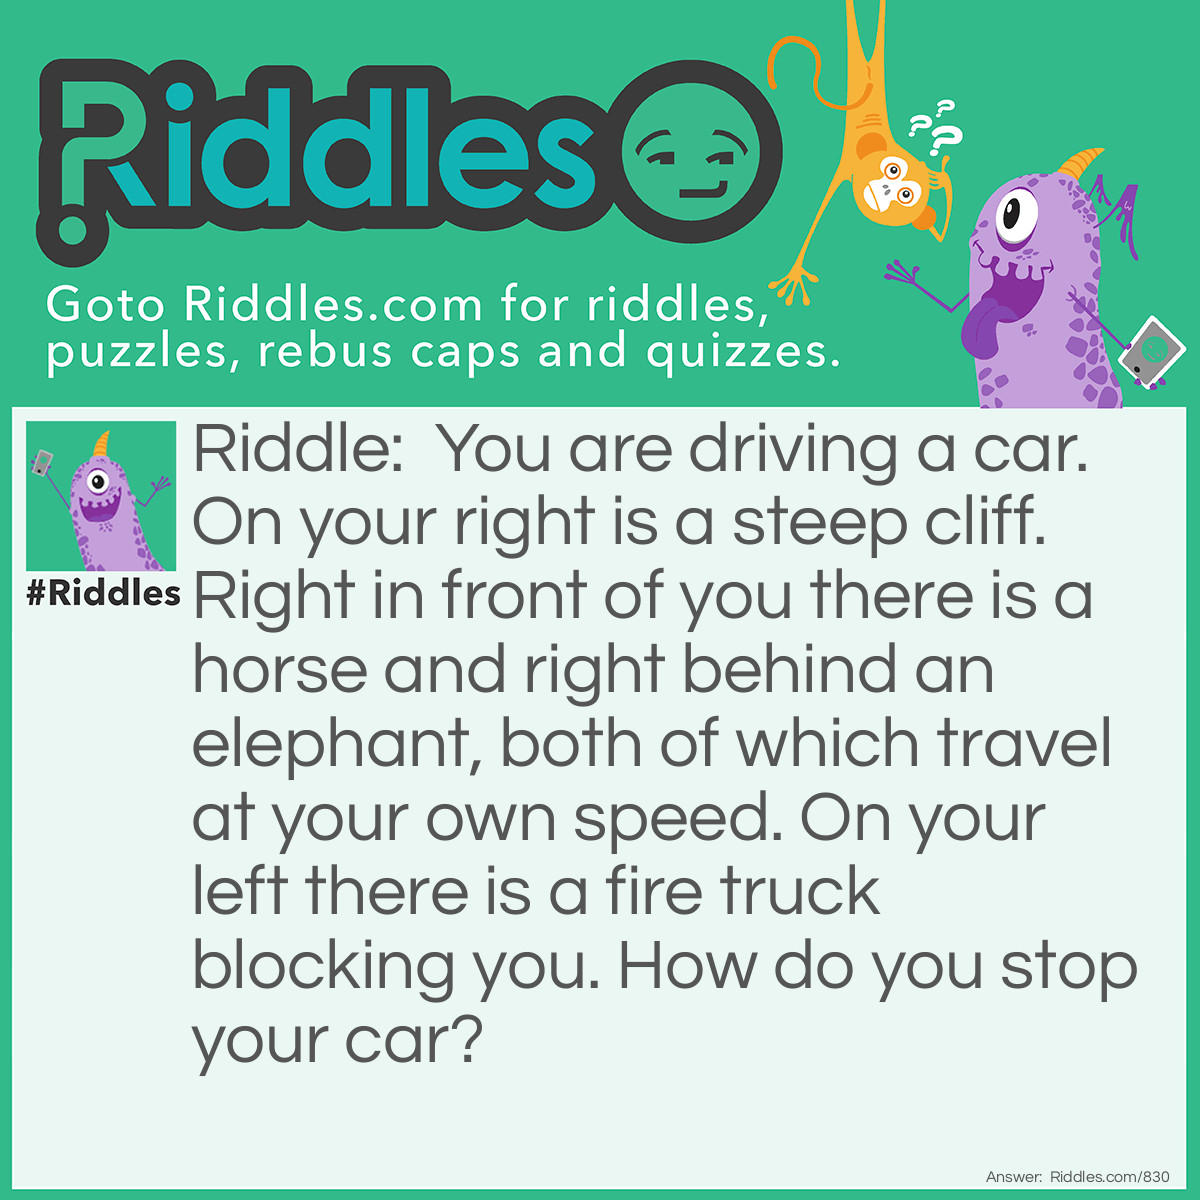 Riddle: You are driving a car. On your right is a steep cliff. Right in front of you there is a horse and right behind an elephant, both of which travel at your own speed. On your left there is a fire truck blocking you. How do you stop your car? Answer: Just ask the merry-go-round operator to stop!